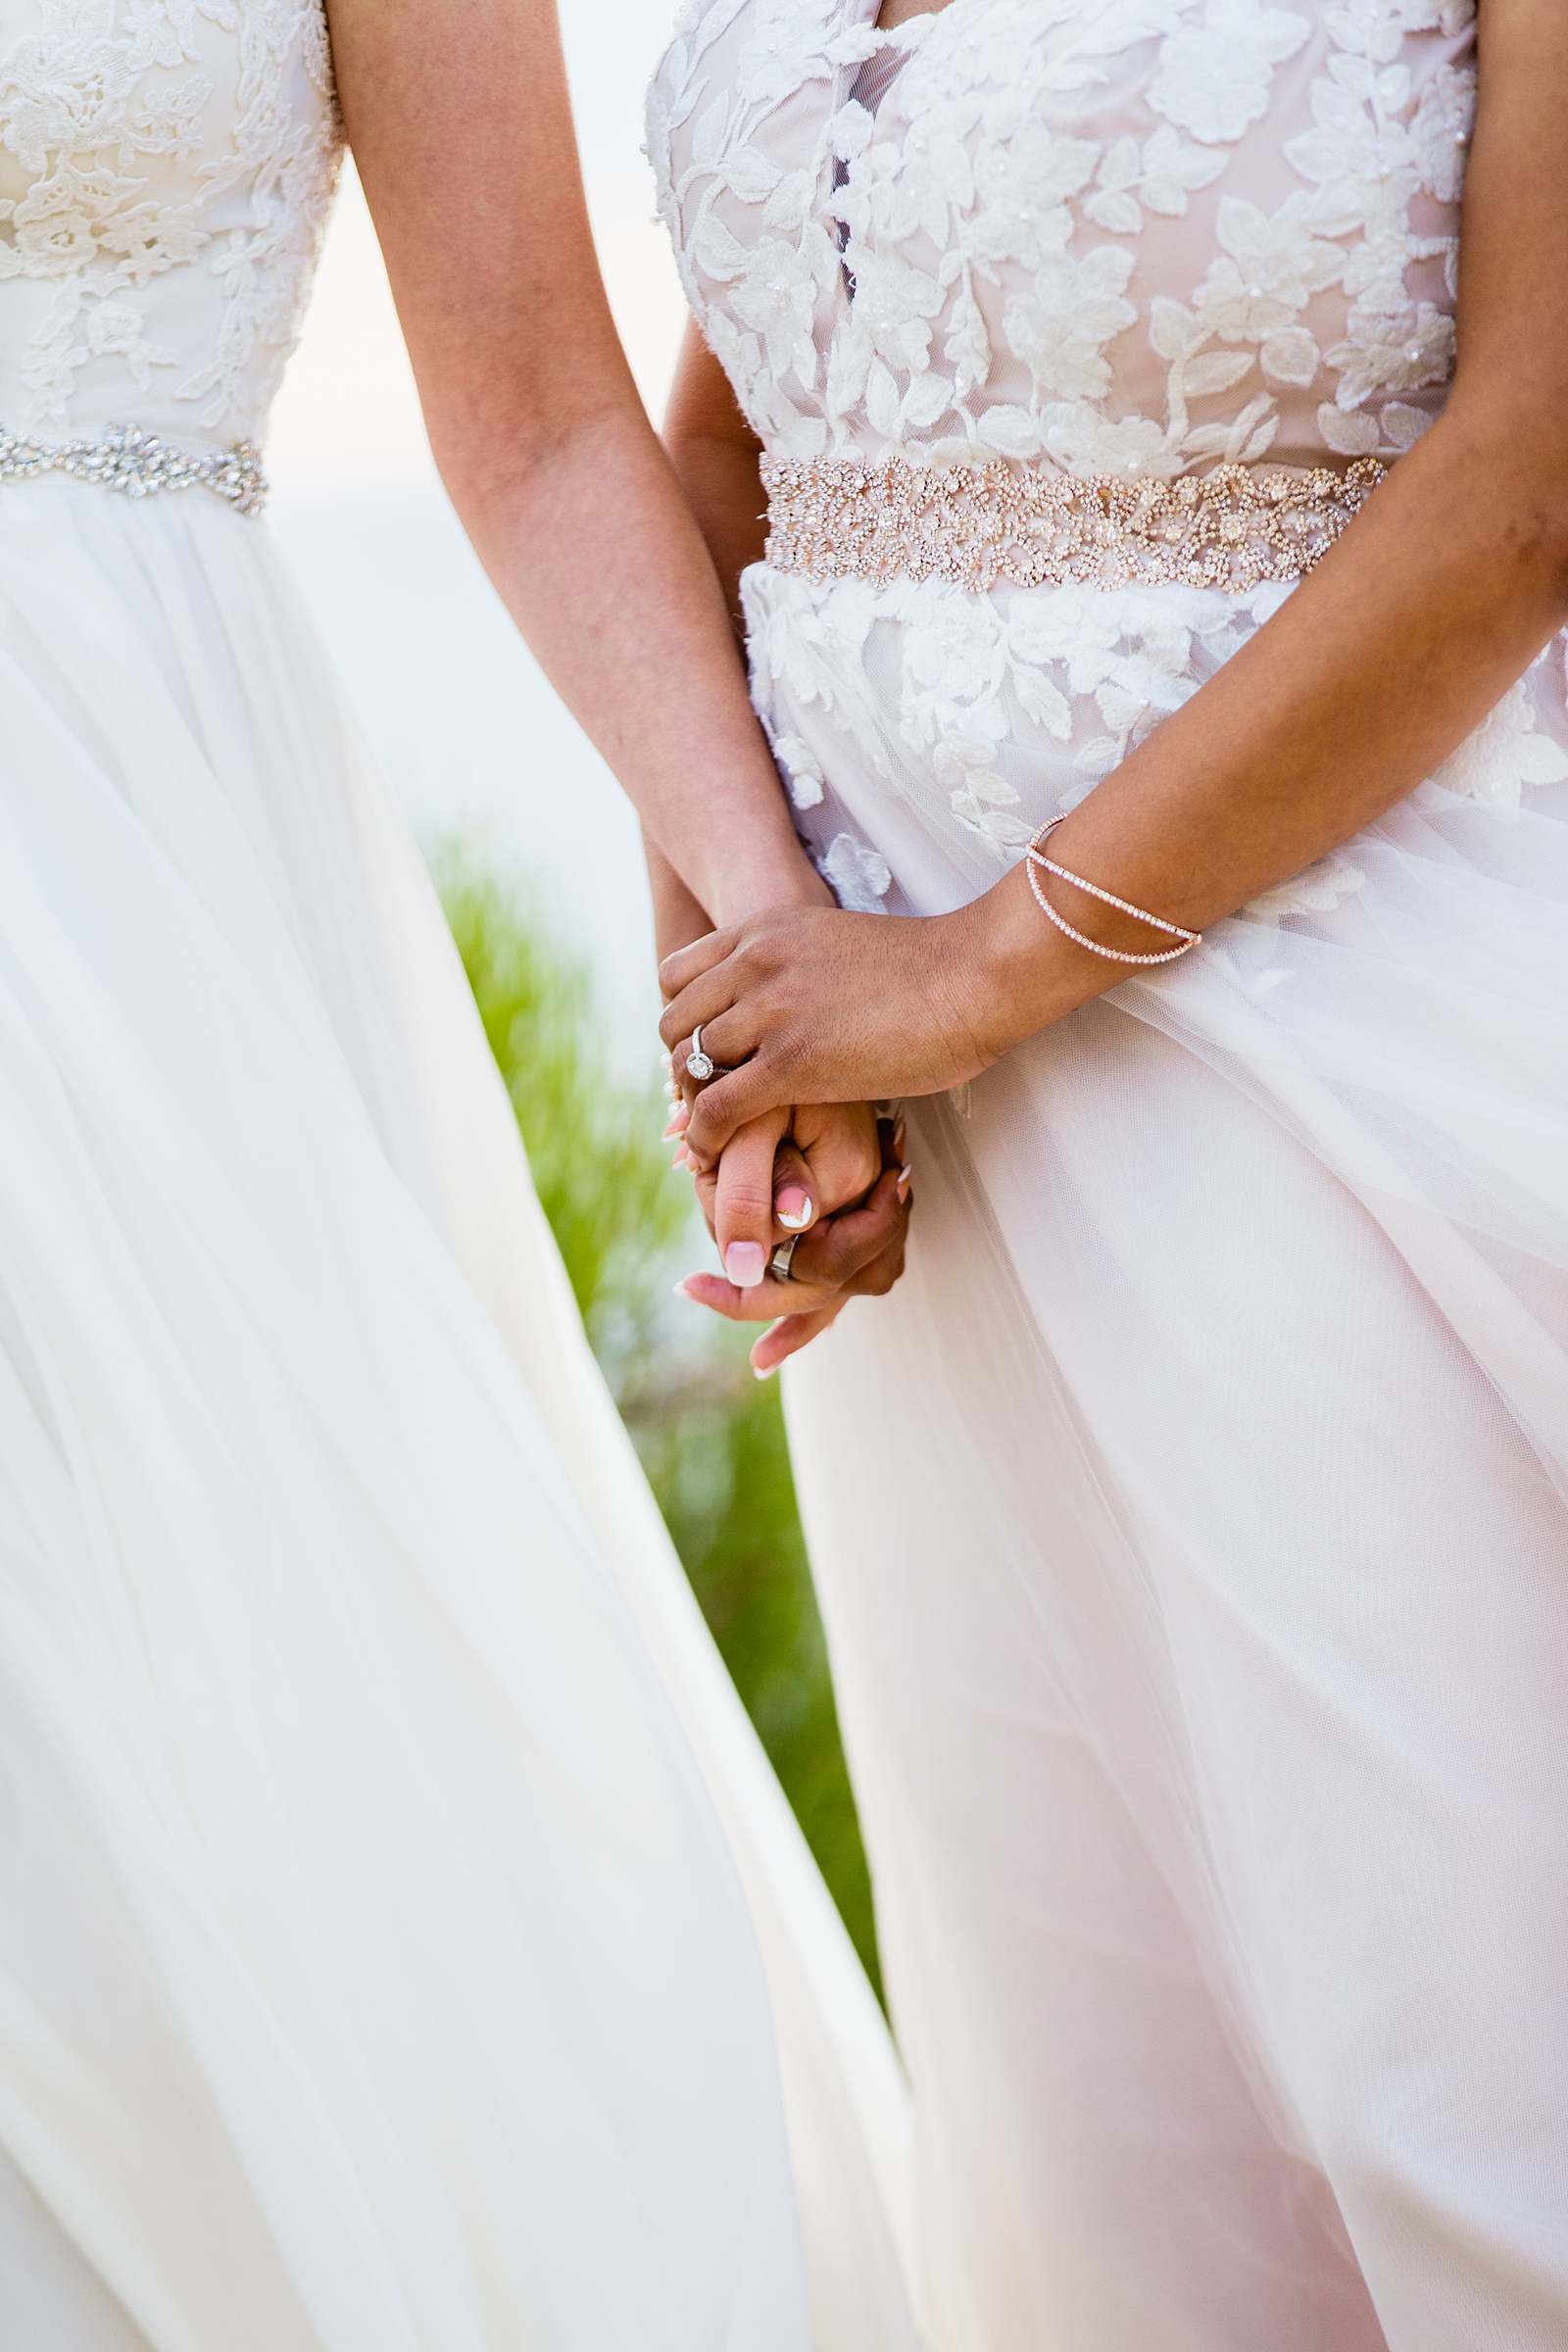 Brides holding hands during their wedding ceremony at their Grand Canyon elopement by PMA Photography.